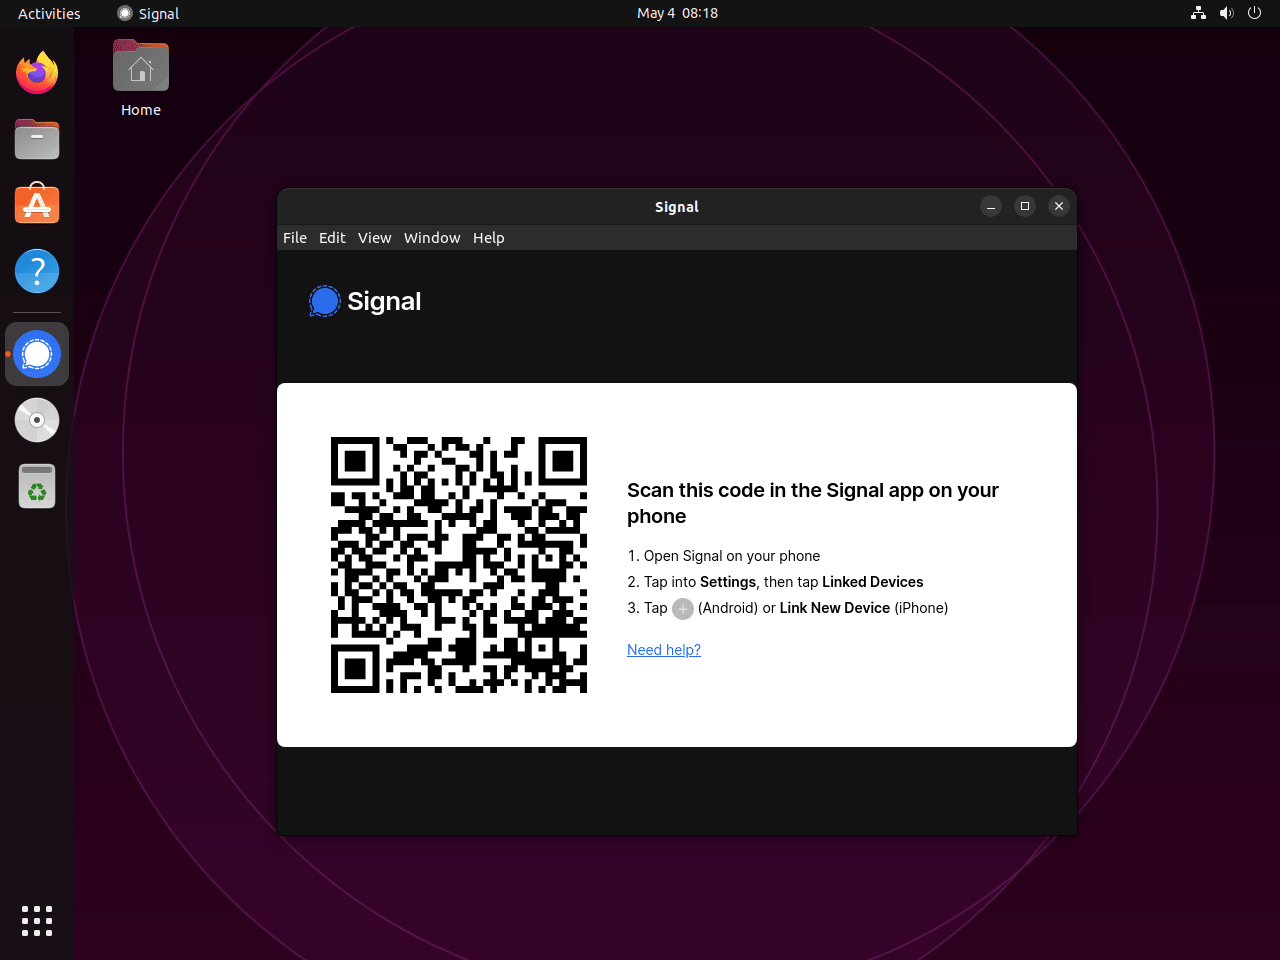 sign into to signal messenger with qr code on ubuntu linux